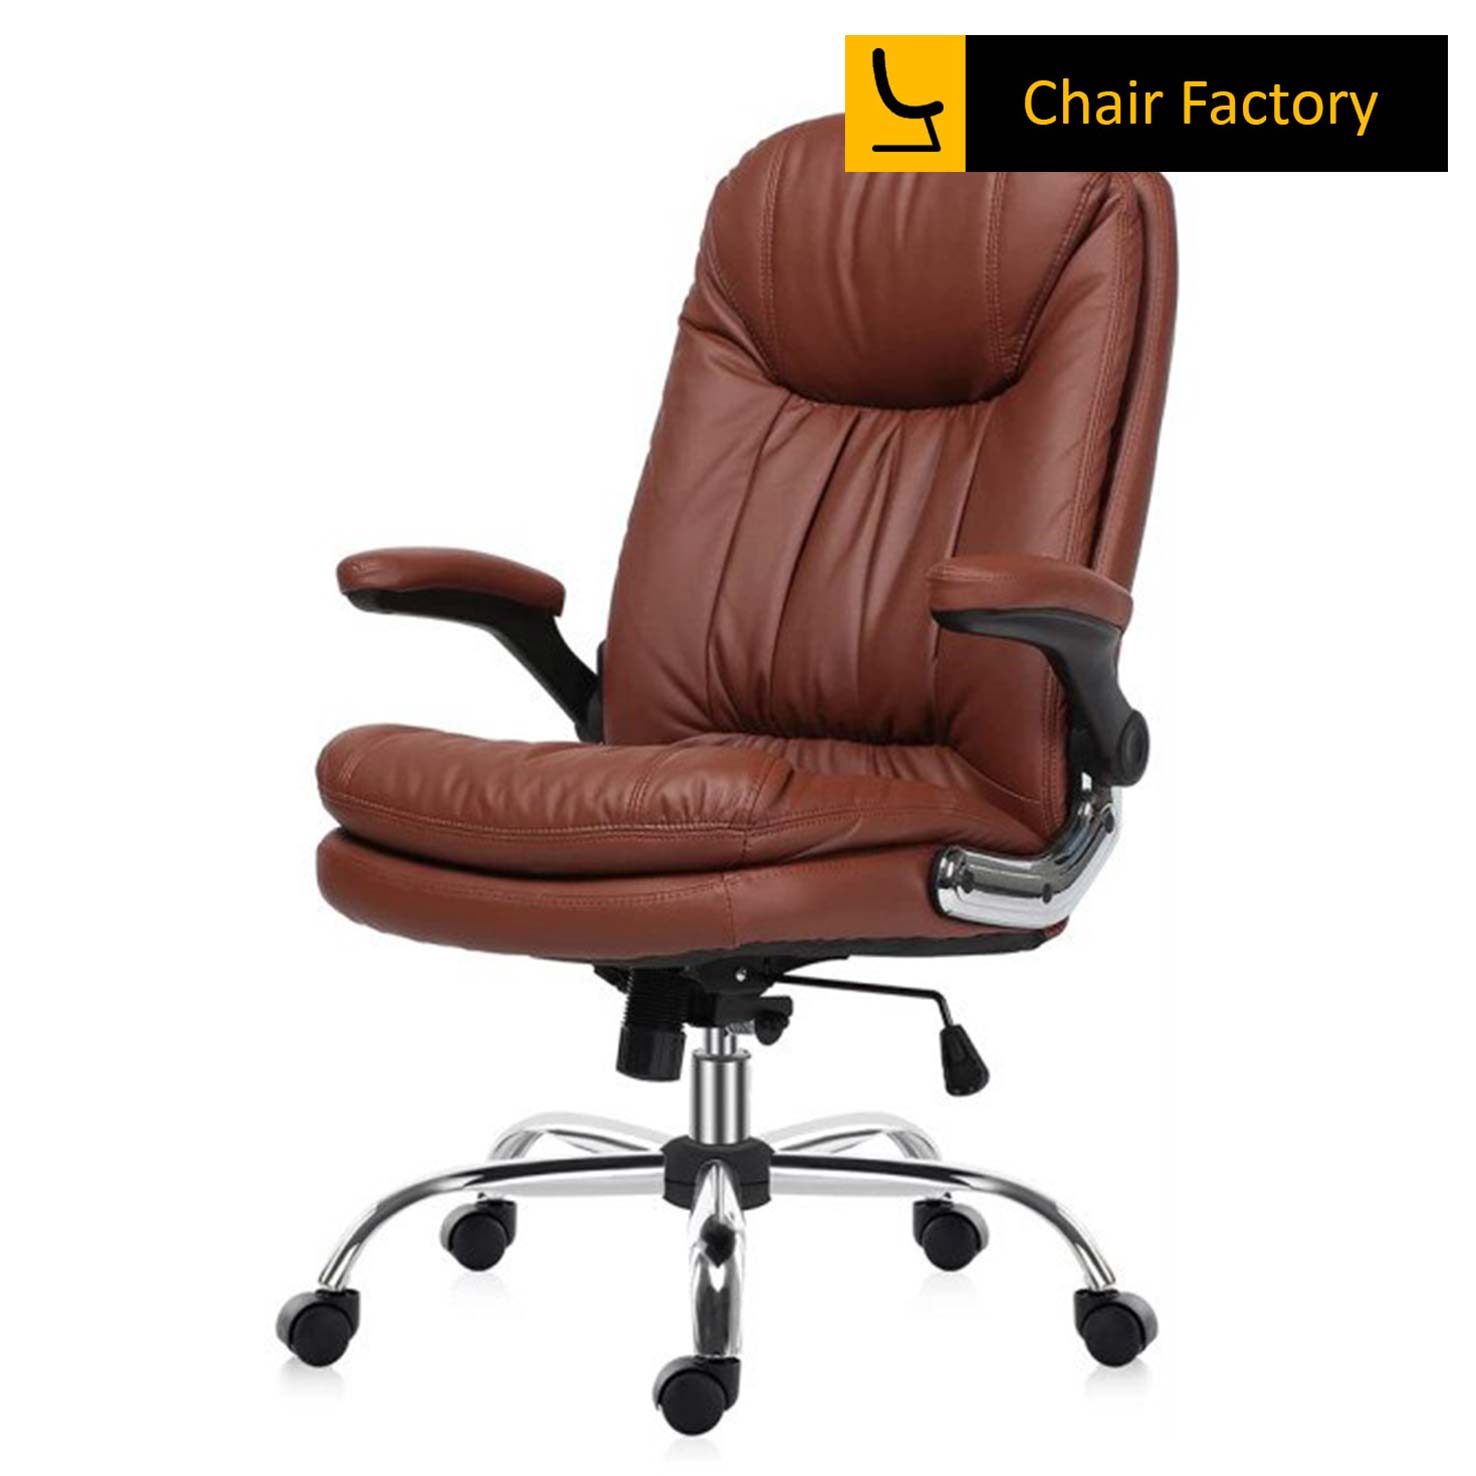 Vagos brown High Back Leather Chair 